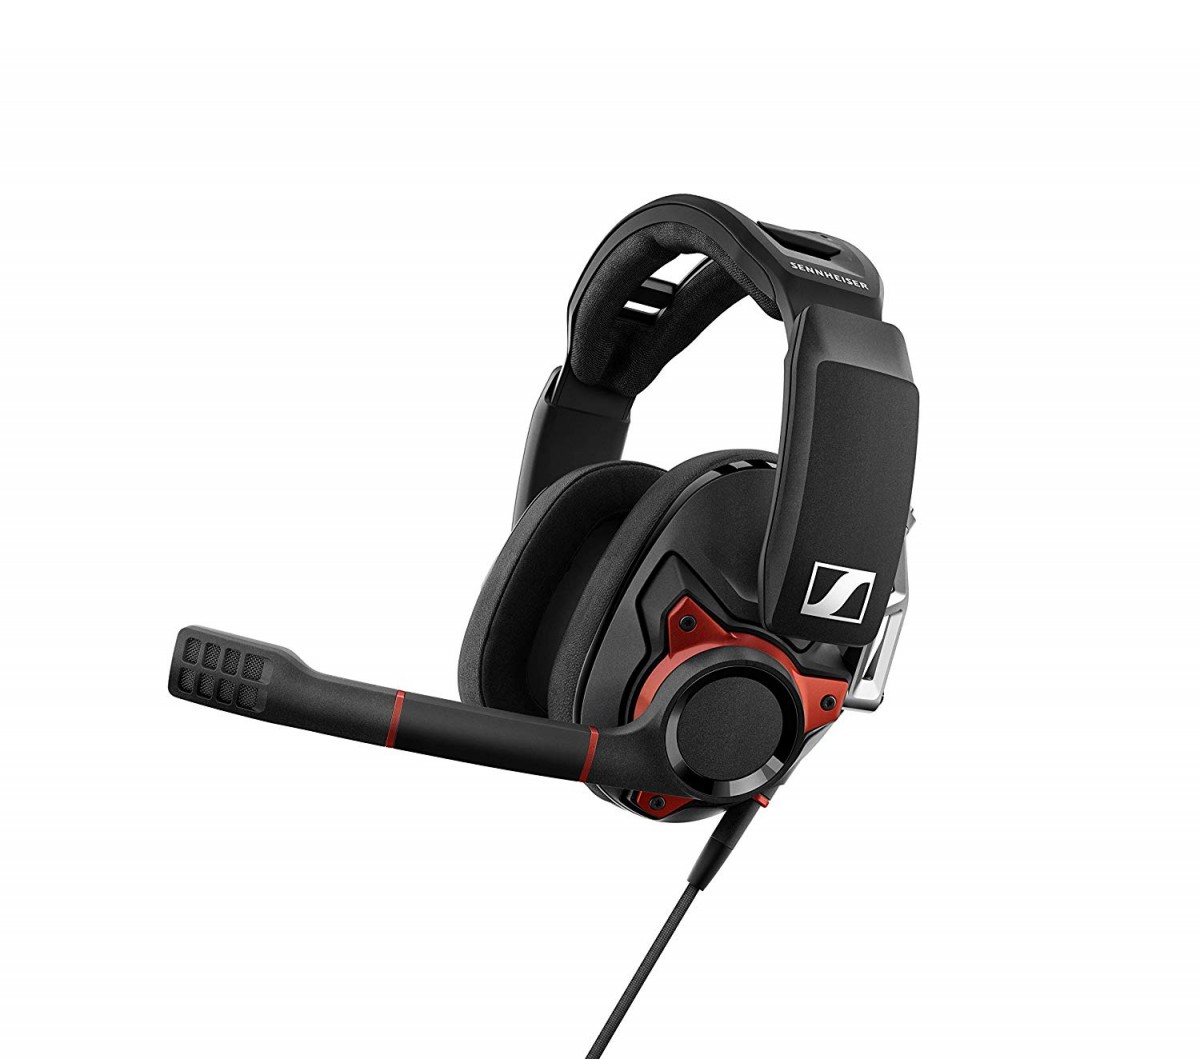 epos gsp 600 gaming headset review